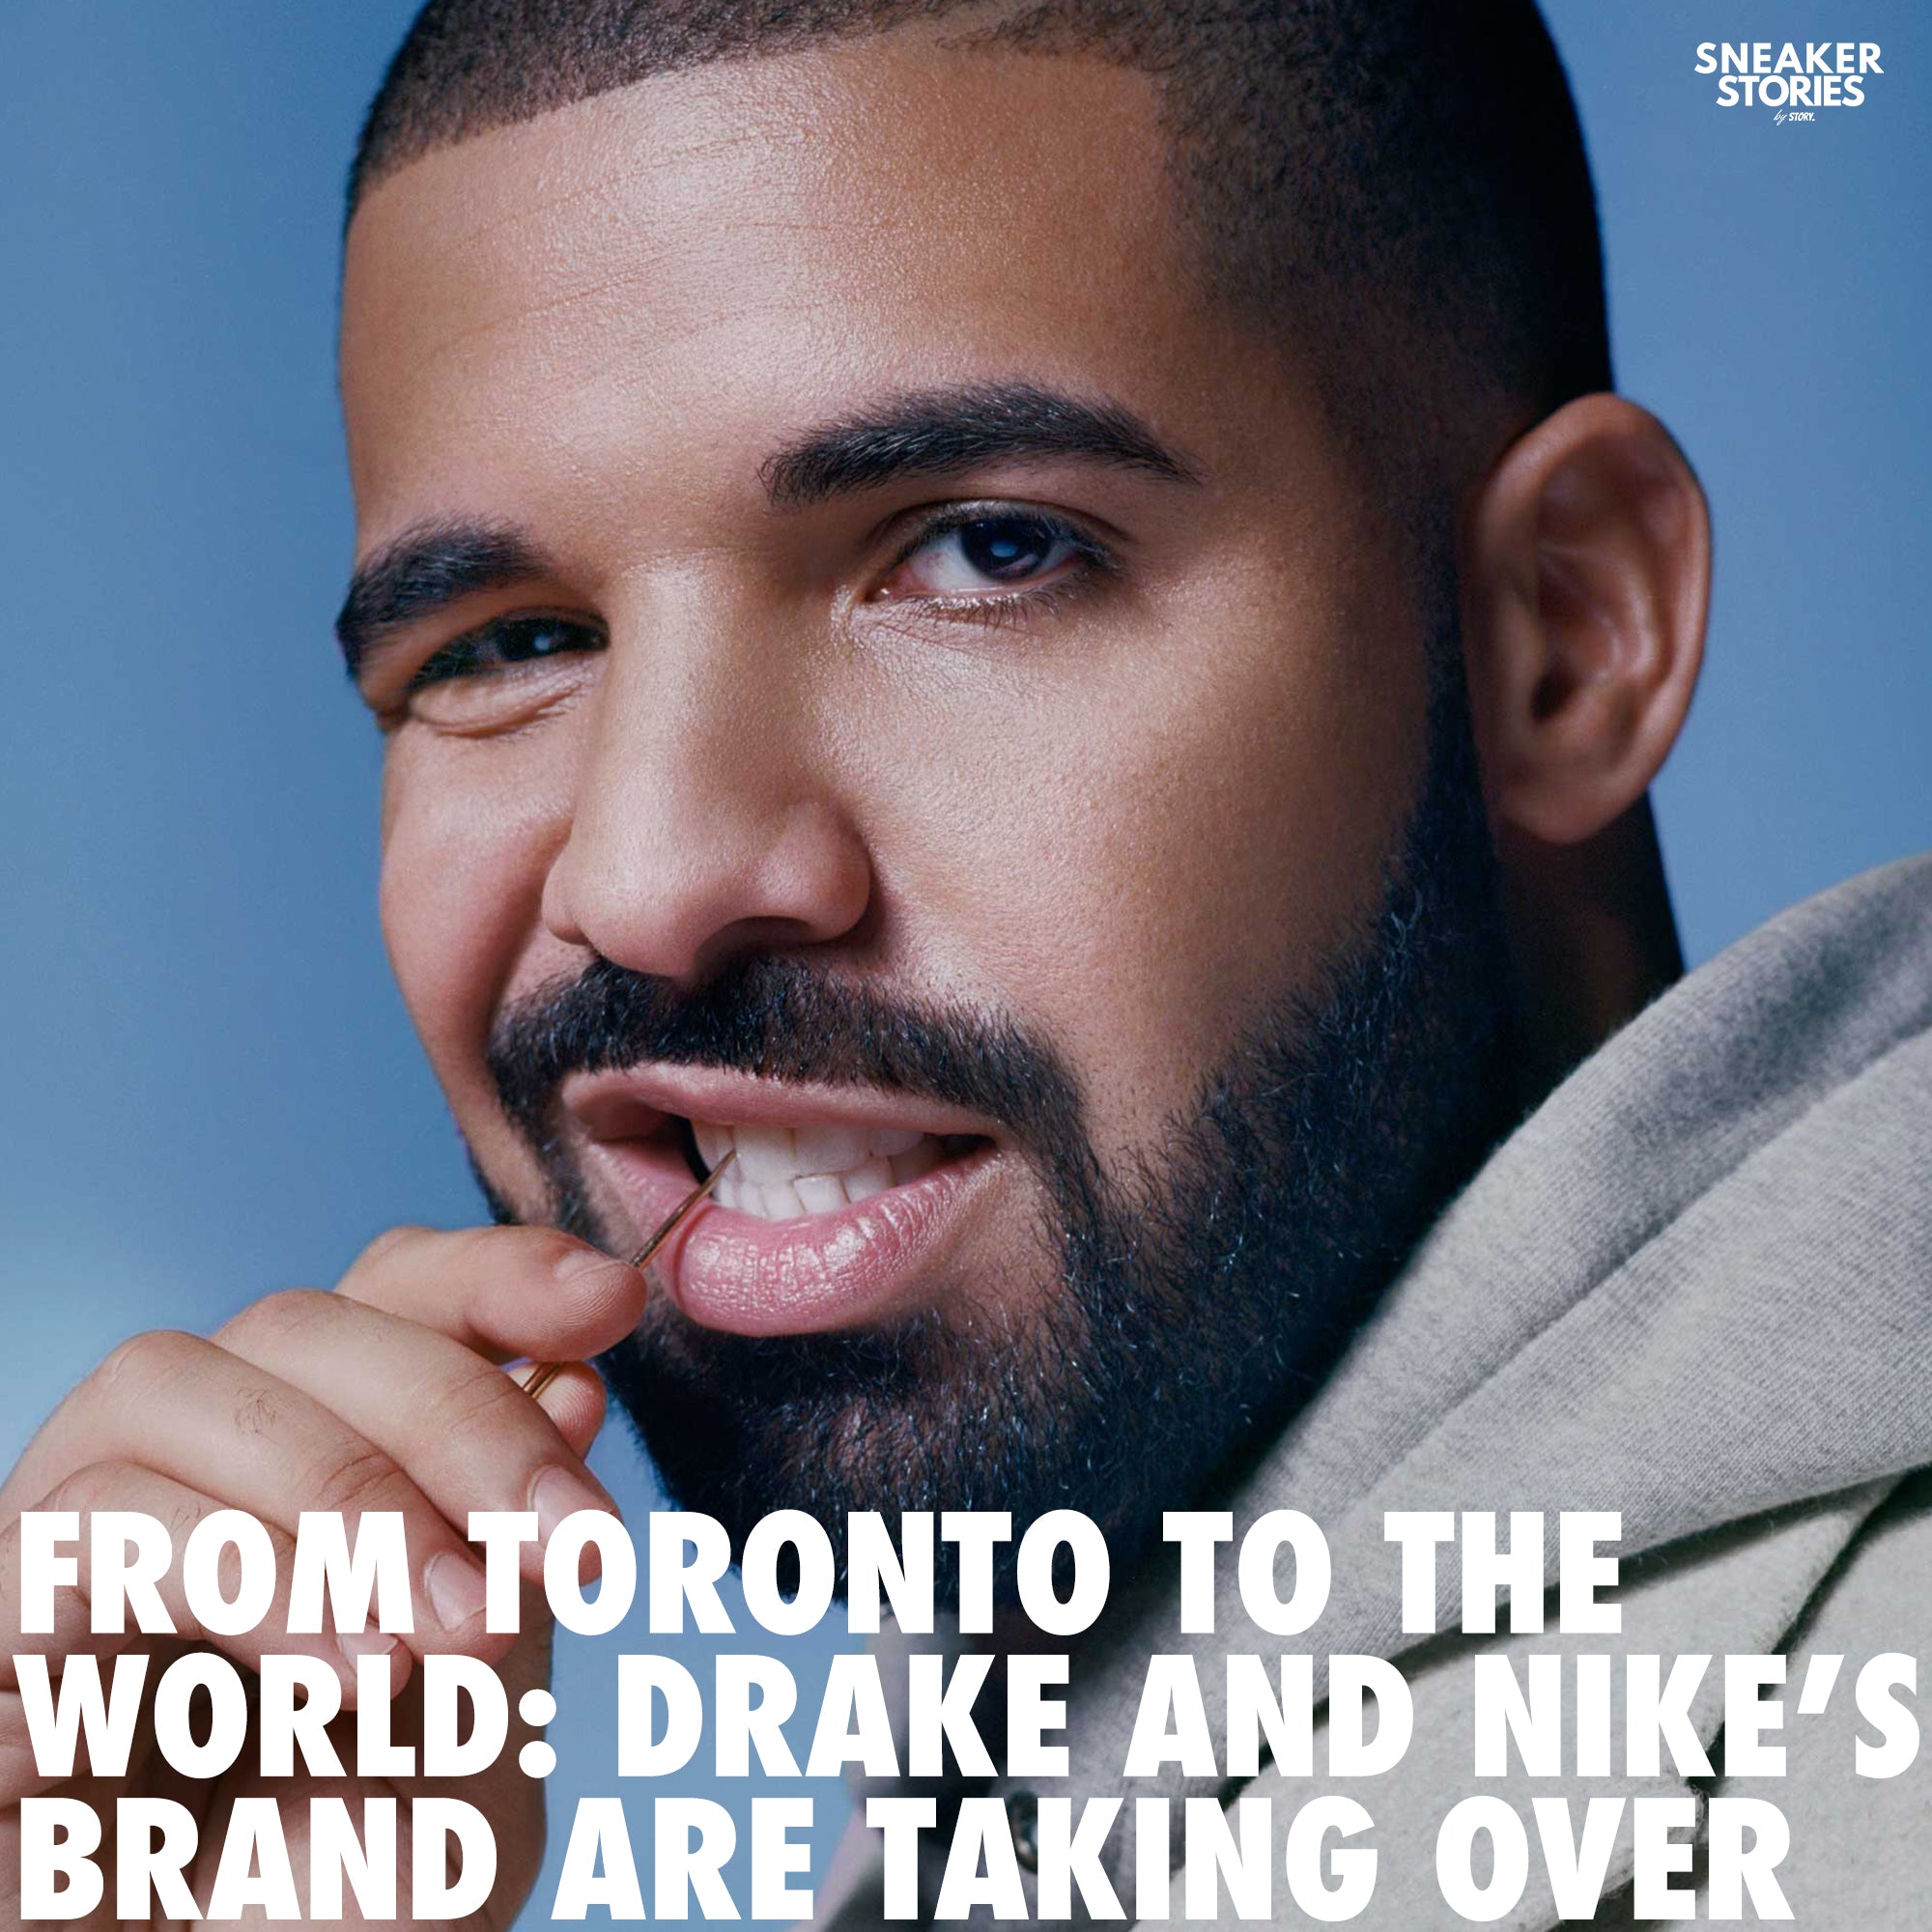 From Toronto To The World: Drake And Nike’s Brand Are Taking Over